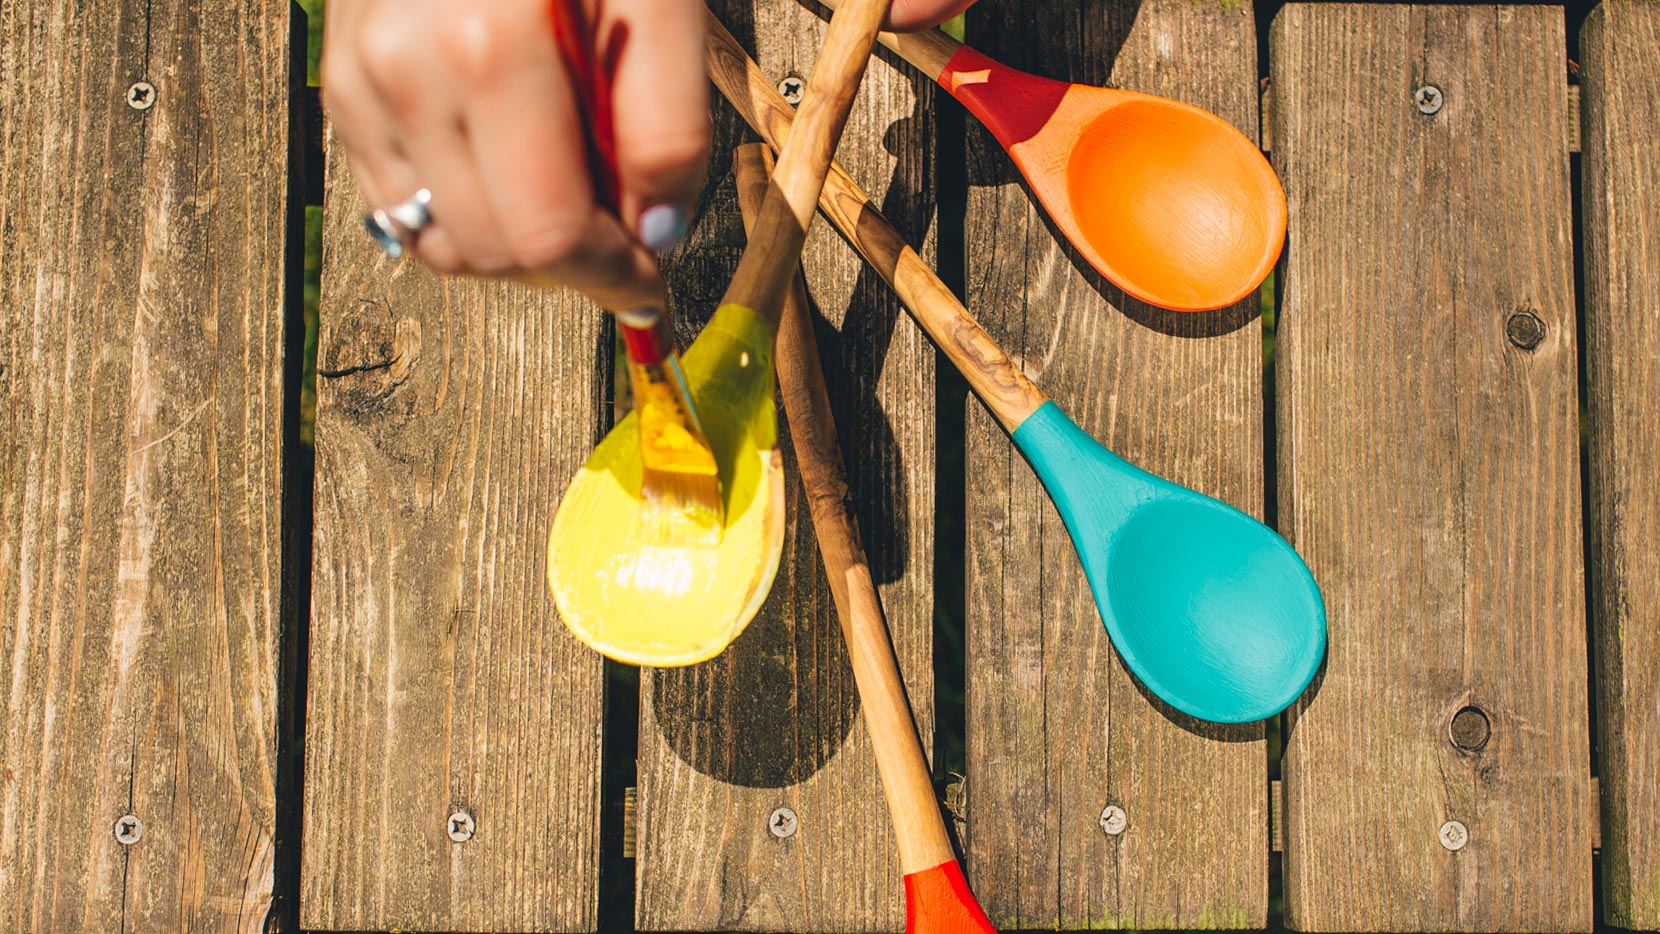 Paint each spoon a different color and write onto spoon names of the herbs you will plant (we love basil, thyme, rosemary and mint!)